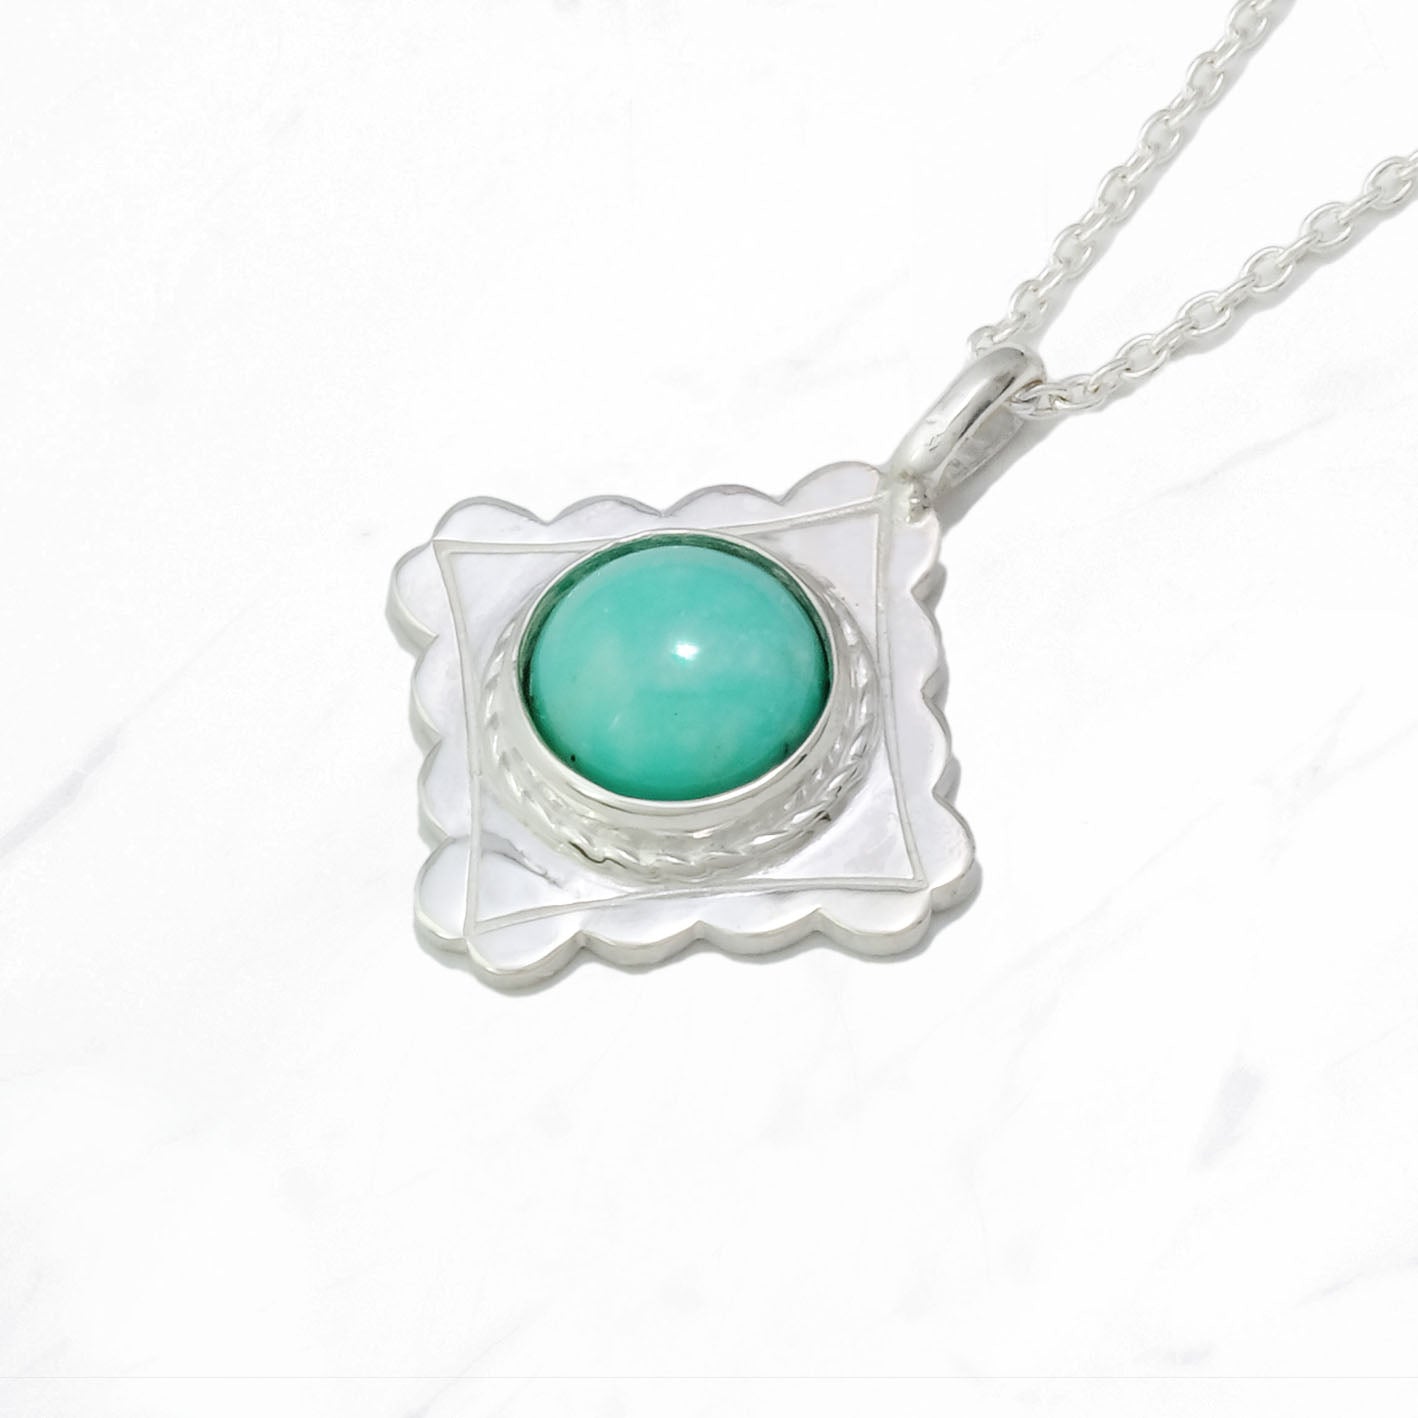 Silver Scalloped Trim Necklace (Turquoise)